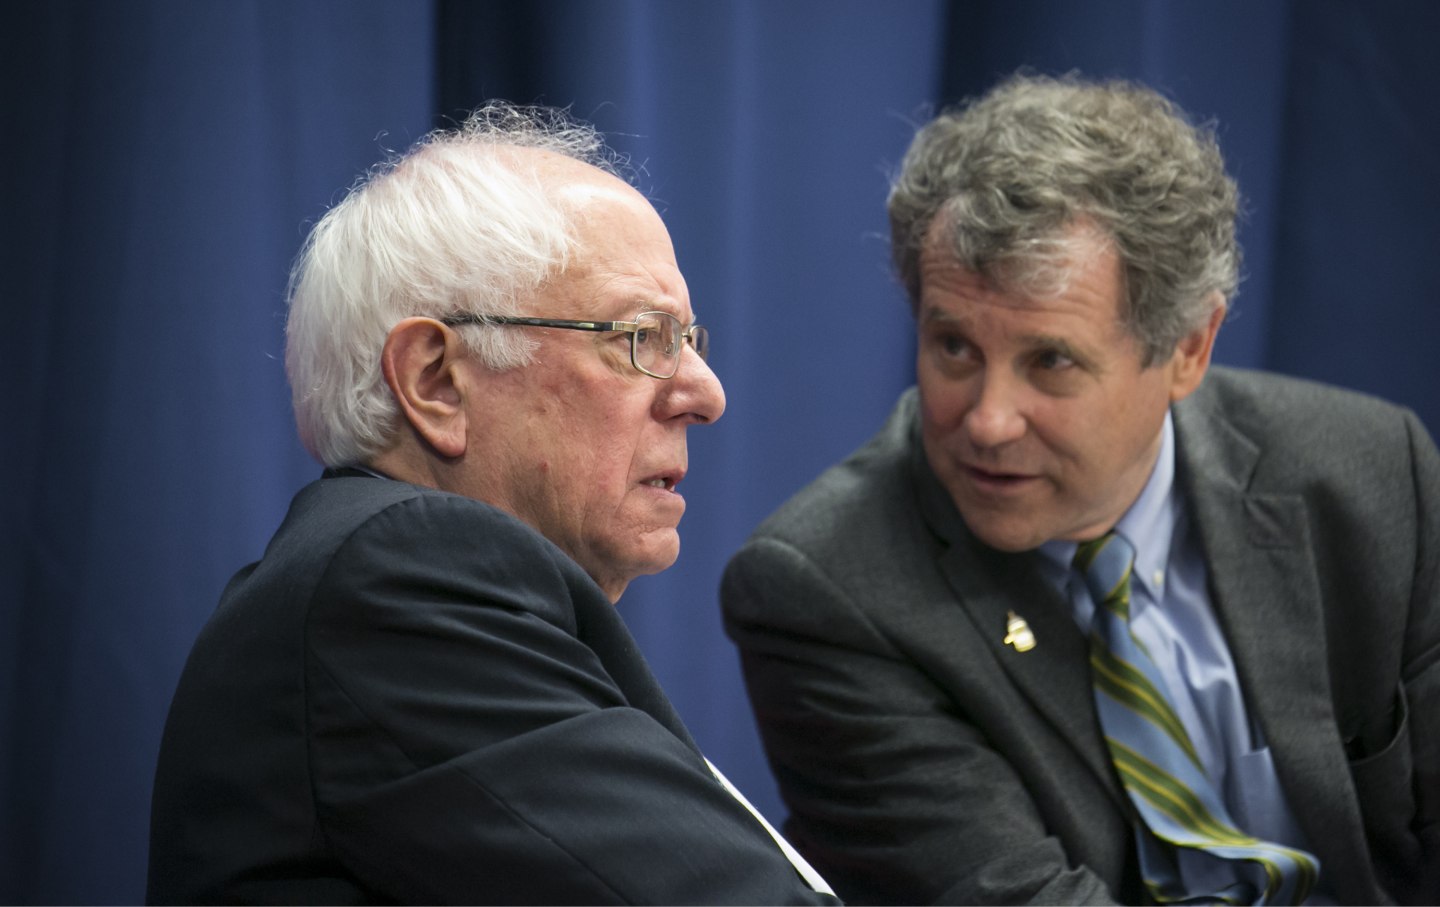 Senator Bernie Sanders, an Independent from Vermont and 2020 presidential candidate, left, listens as Senator Sherrod Brown, a Democrat from Ohio, speaks during the Martin and Coretta King Unity Breakfast in Selma, Alabama, U.S., on Sunday, March 3, 2019.